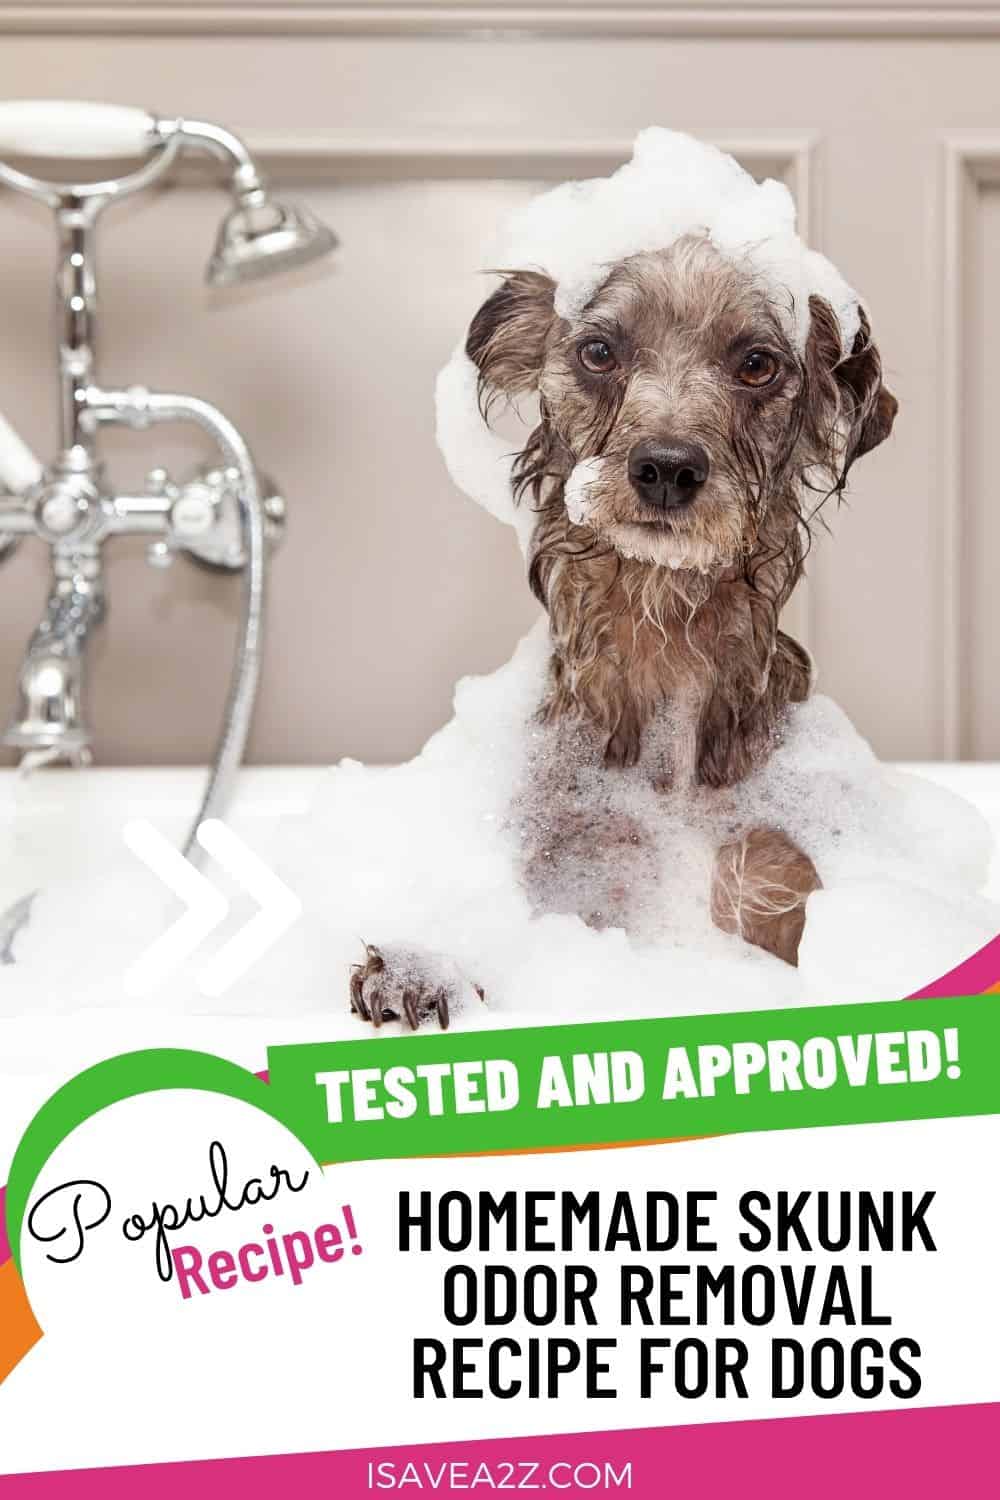 Natures Miracle Skunk Odor Removal for Dogs!